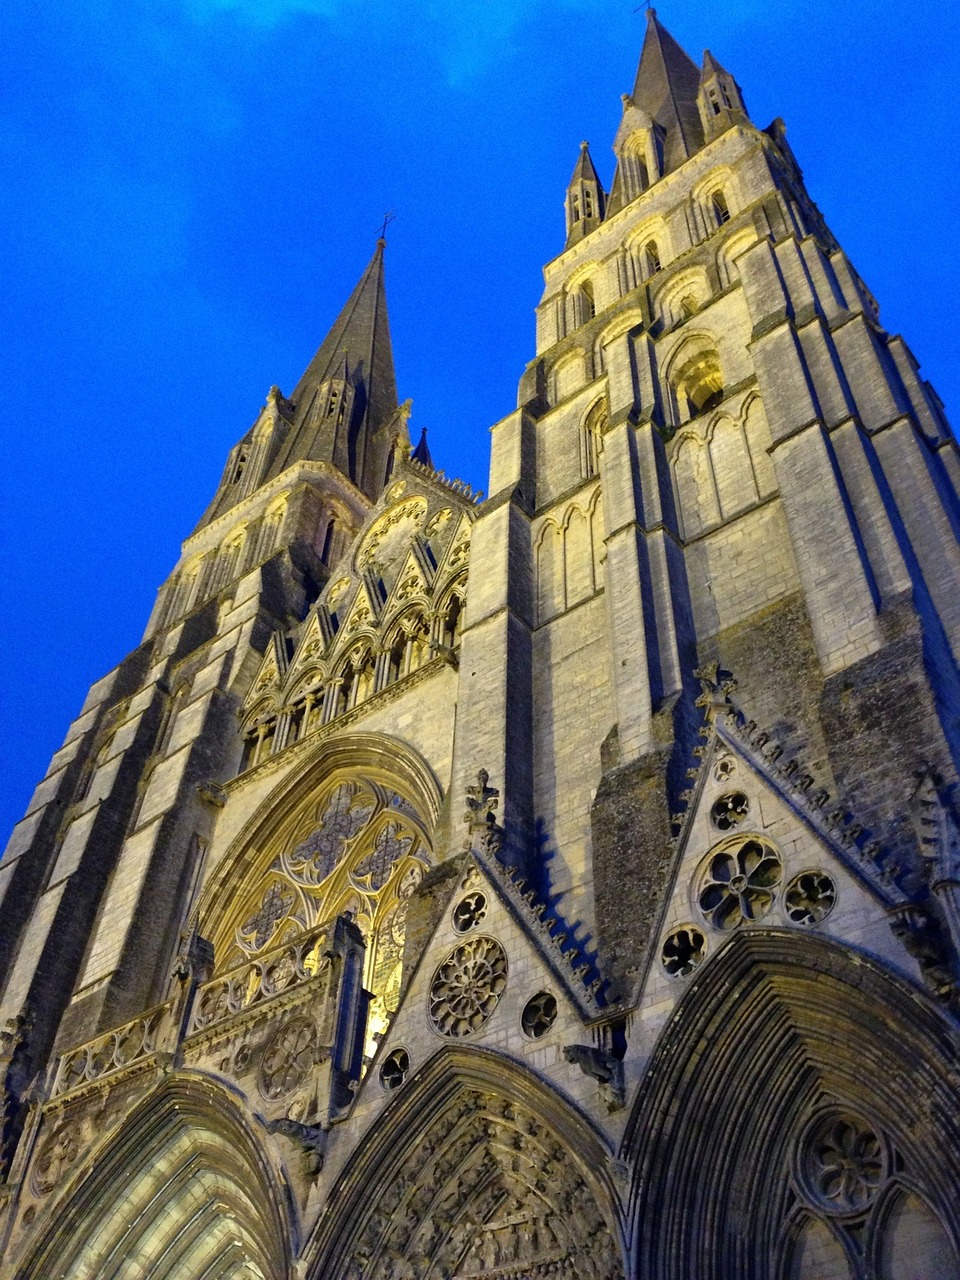 Historical and Culinary Delights of Normandy